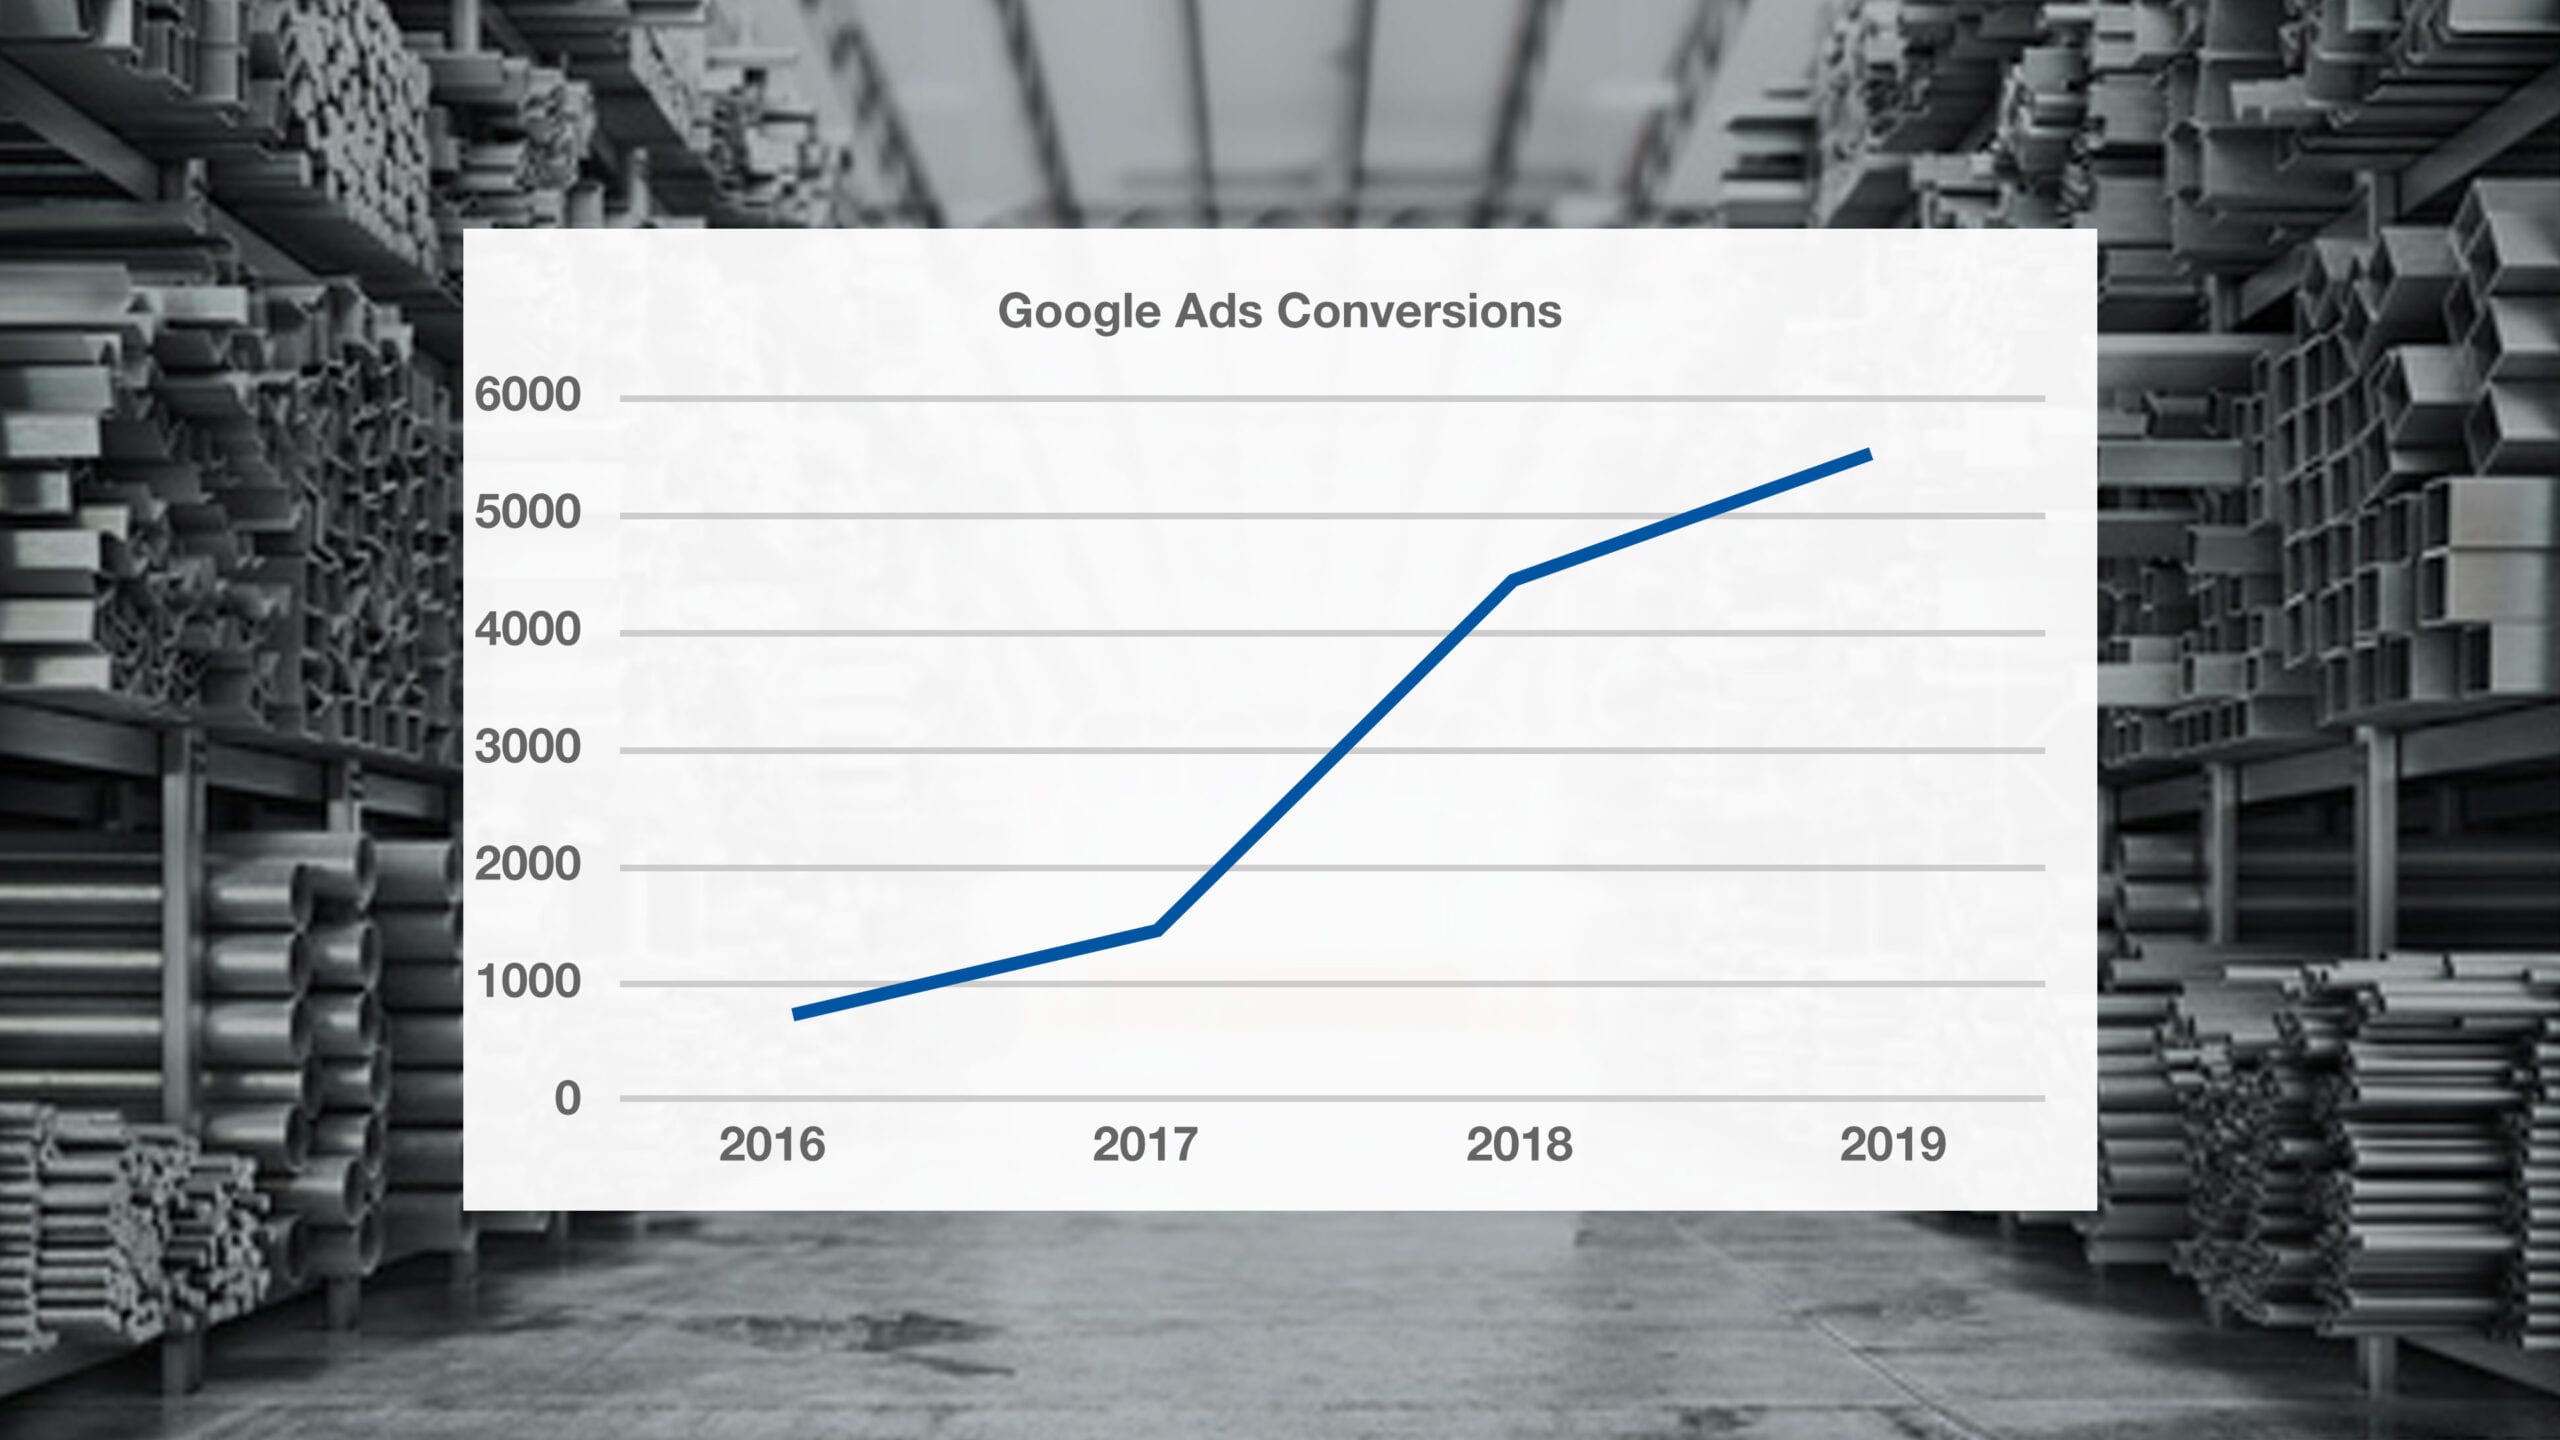 Line chart showing Google Ads Conversions going up